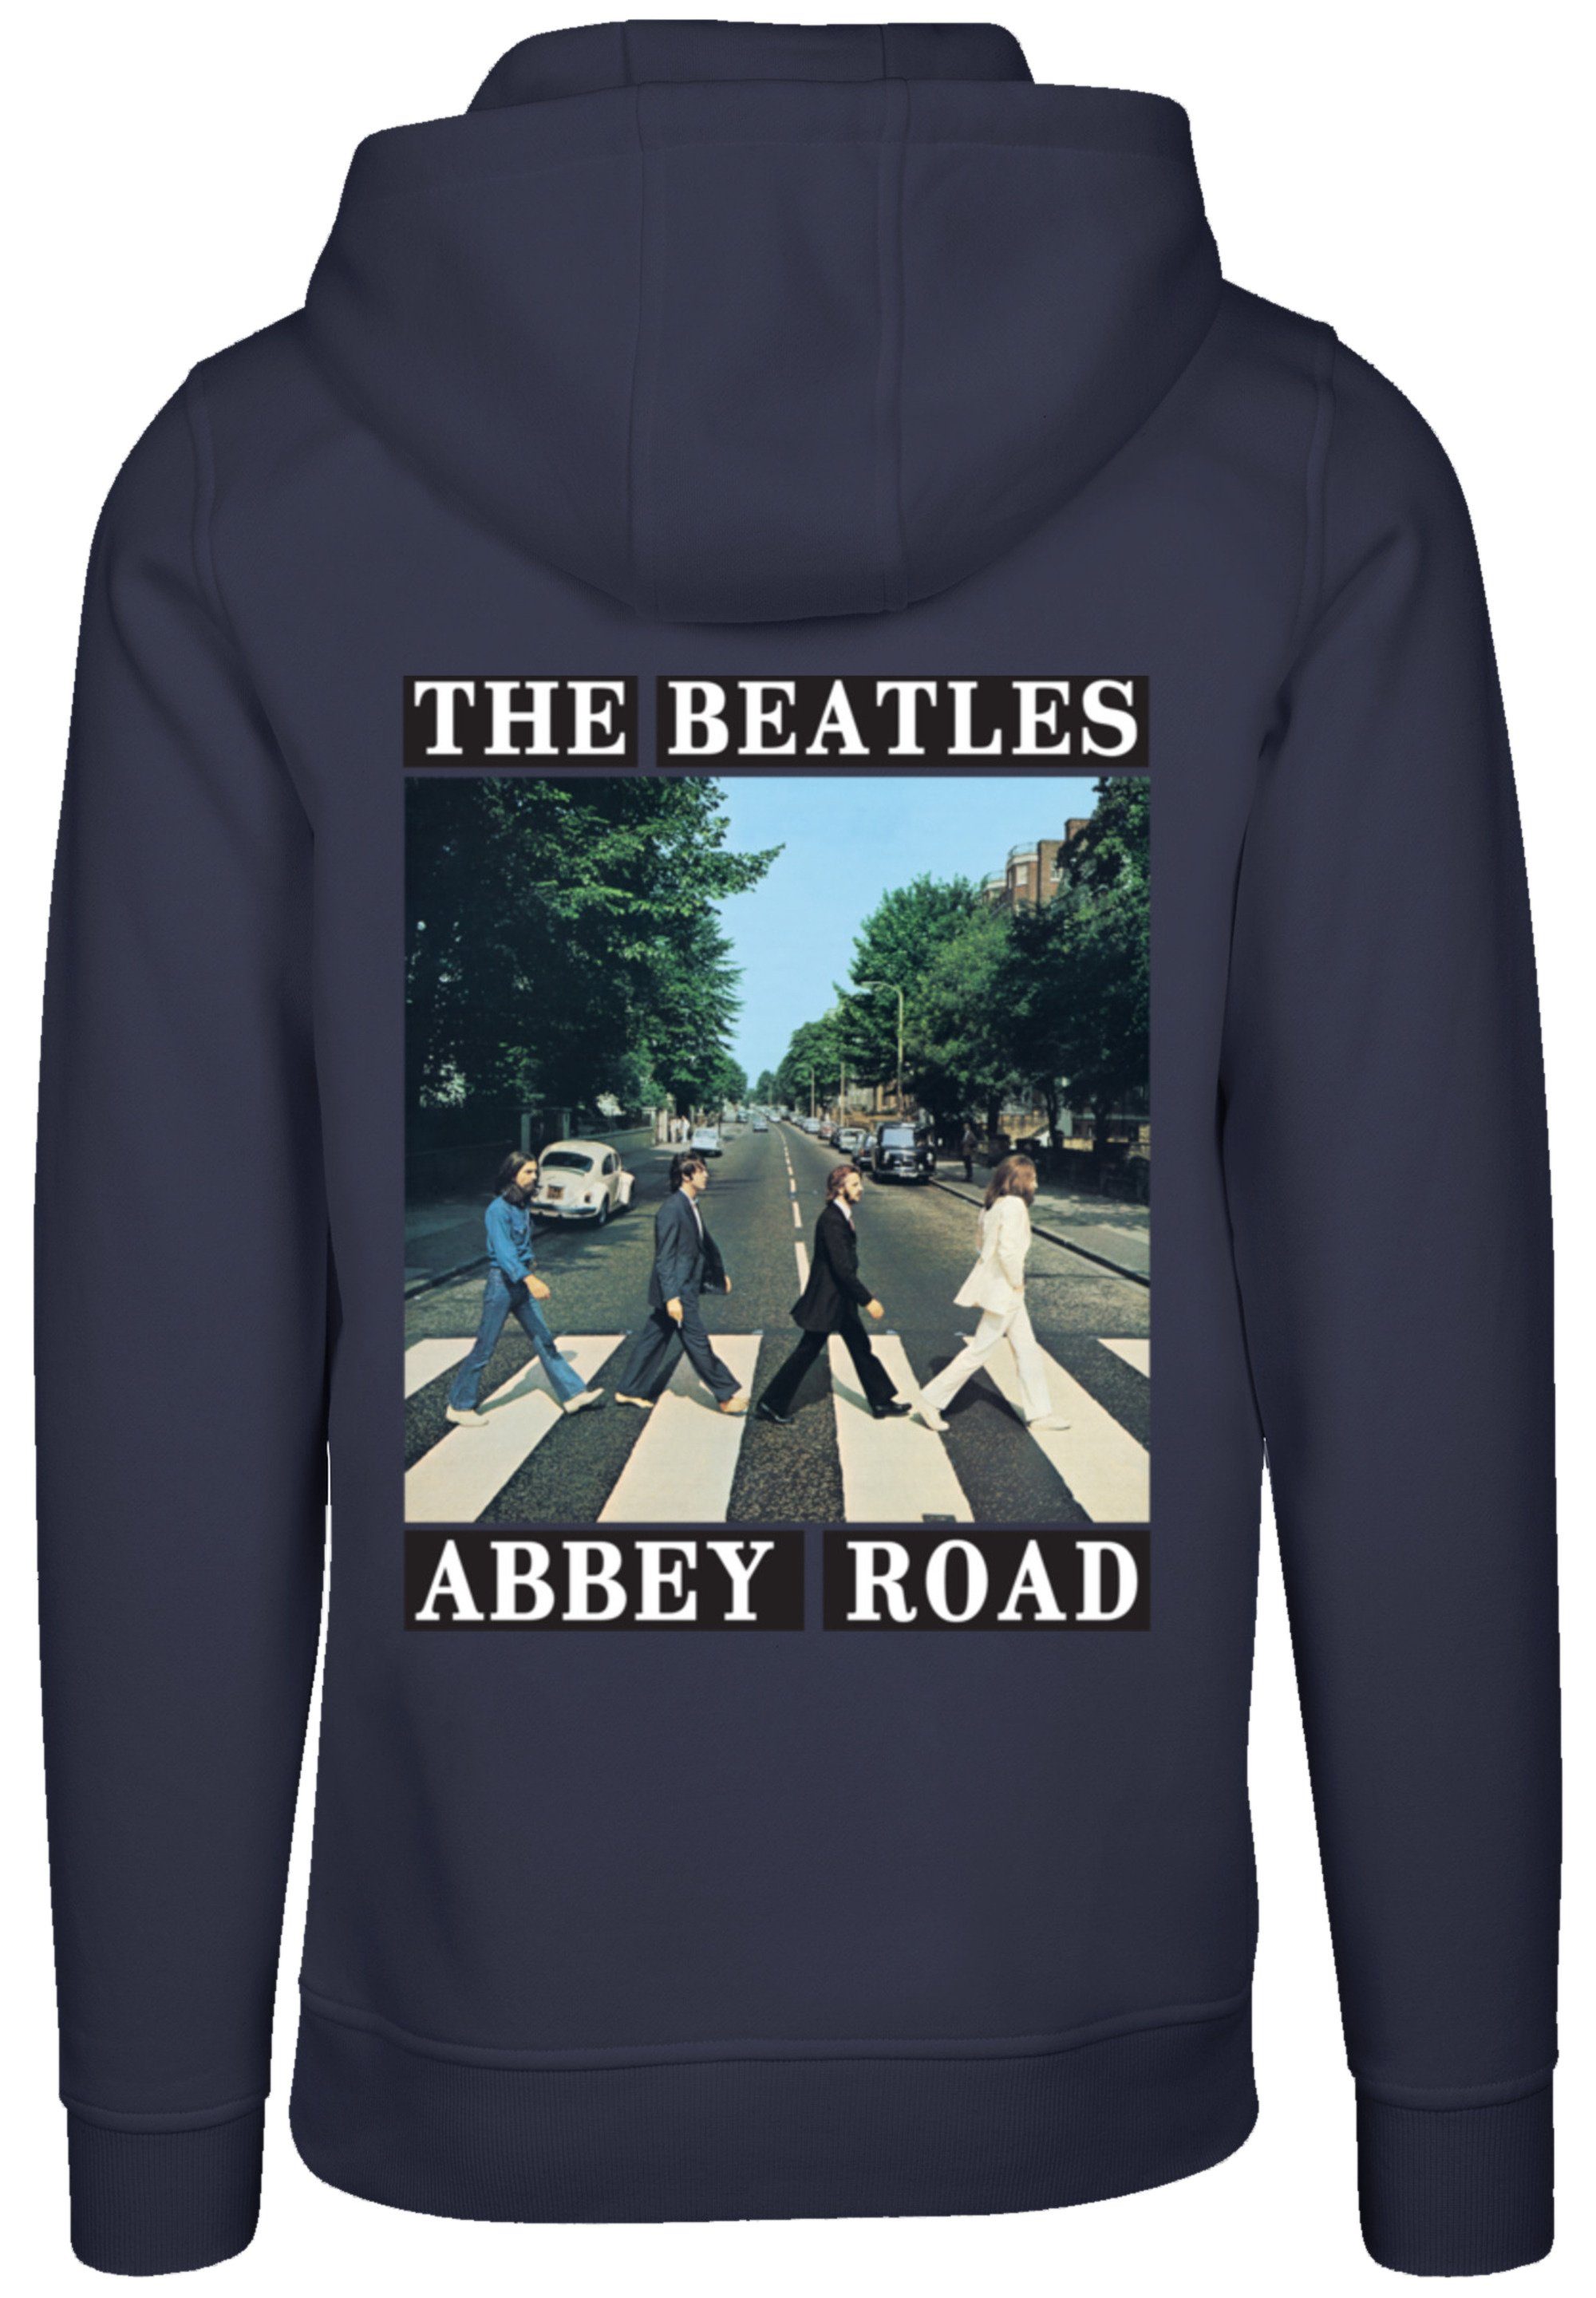 The F4NT4STIC Abbey Musik navy Warm, Rock Road Beatles Hoodie, Bequem Band Kapuzenpullover